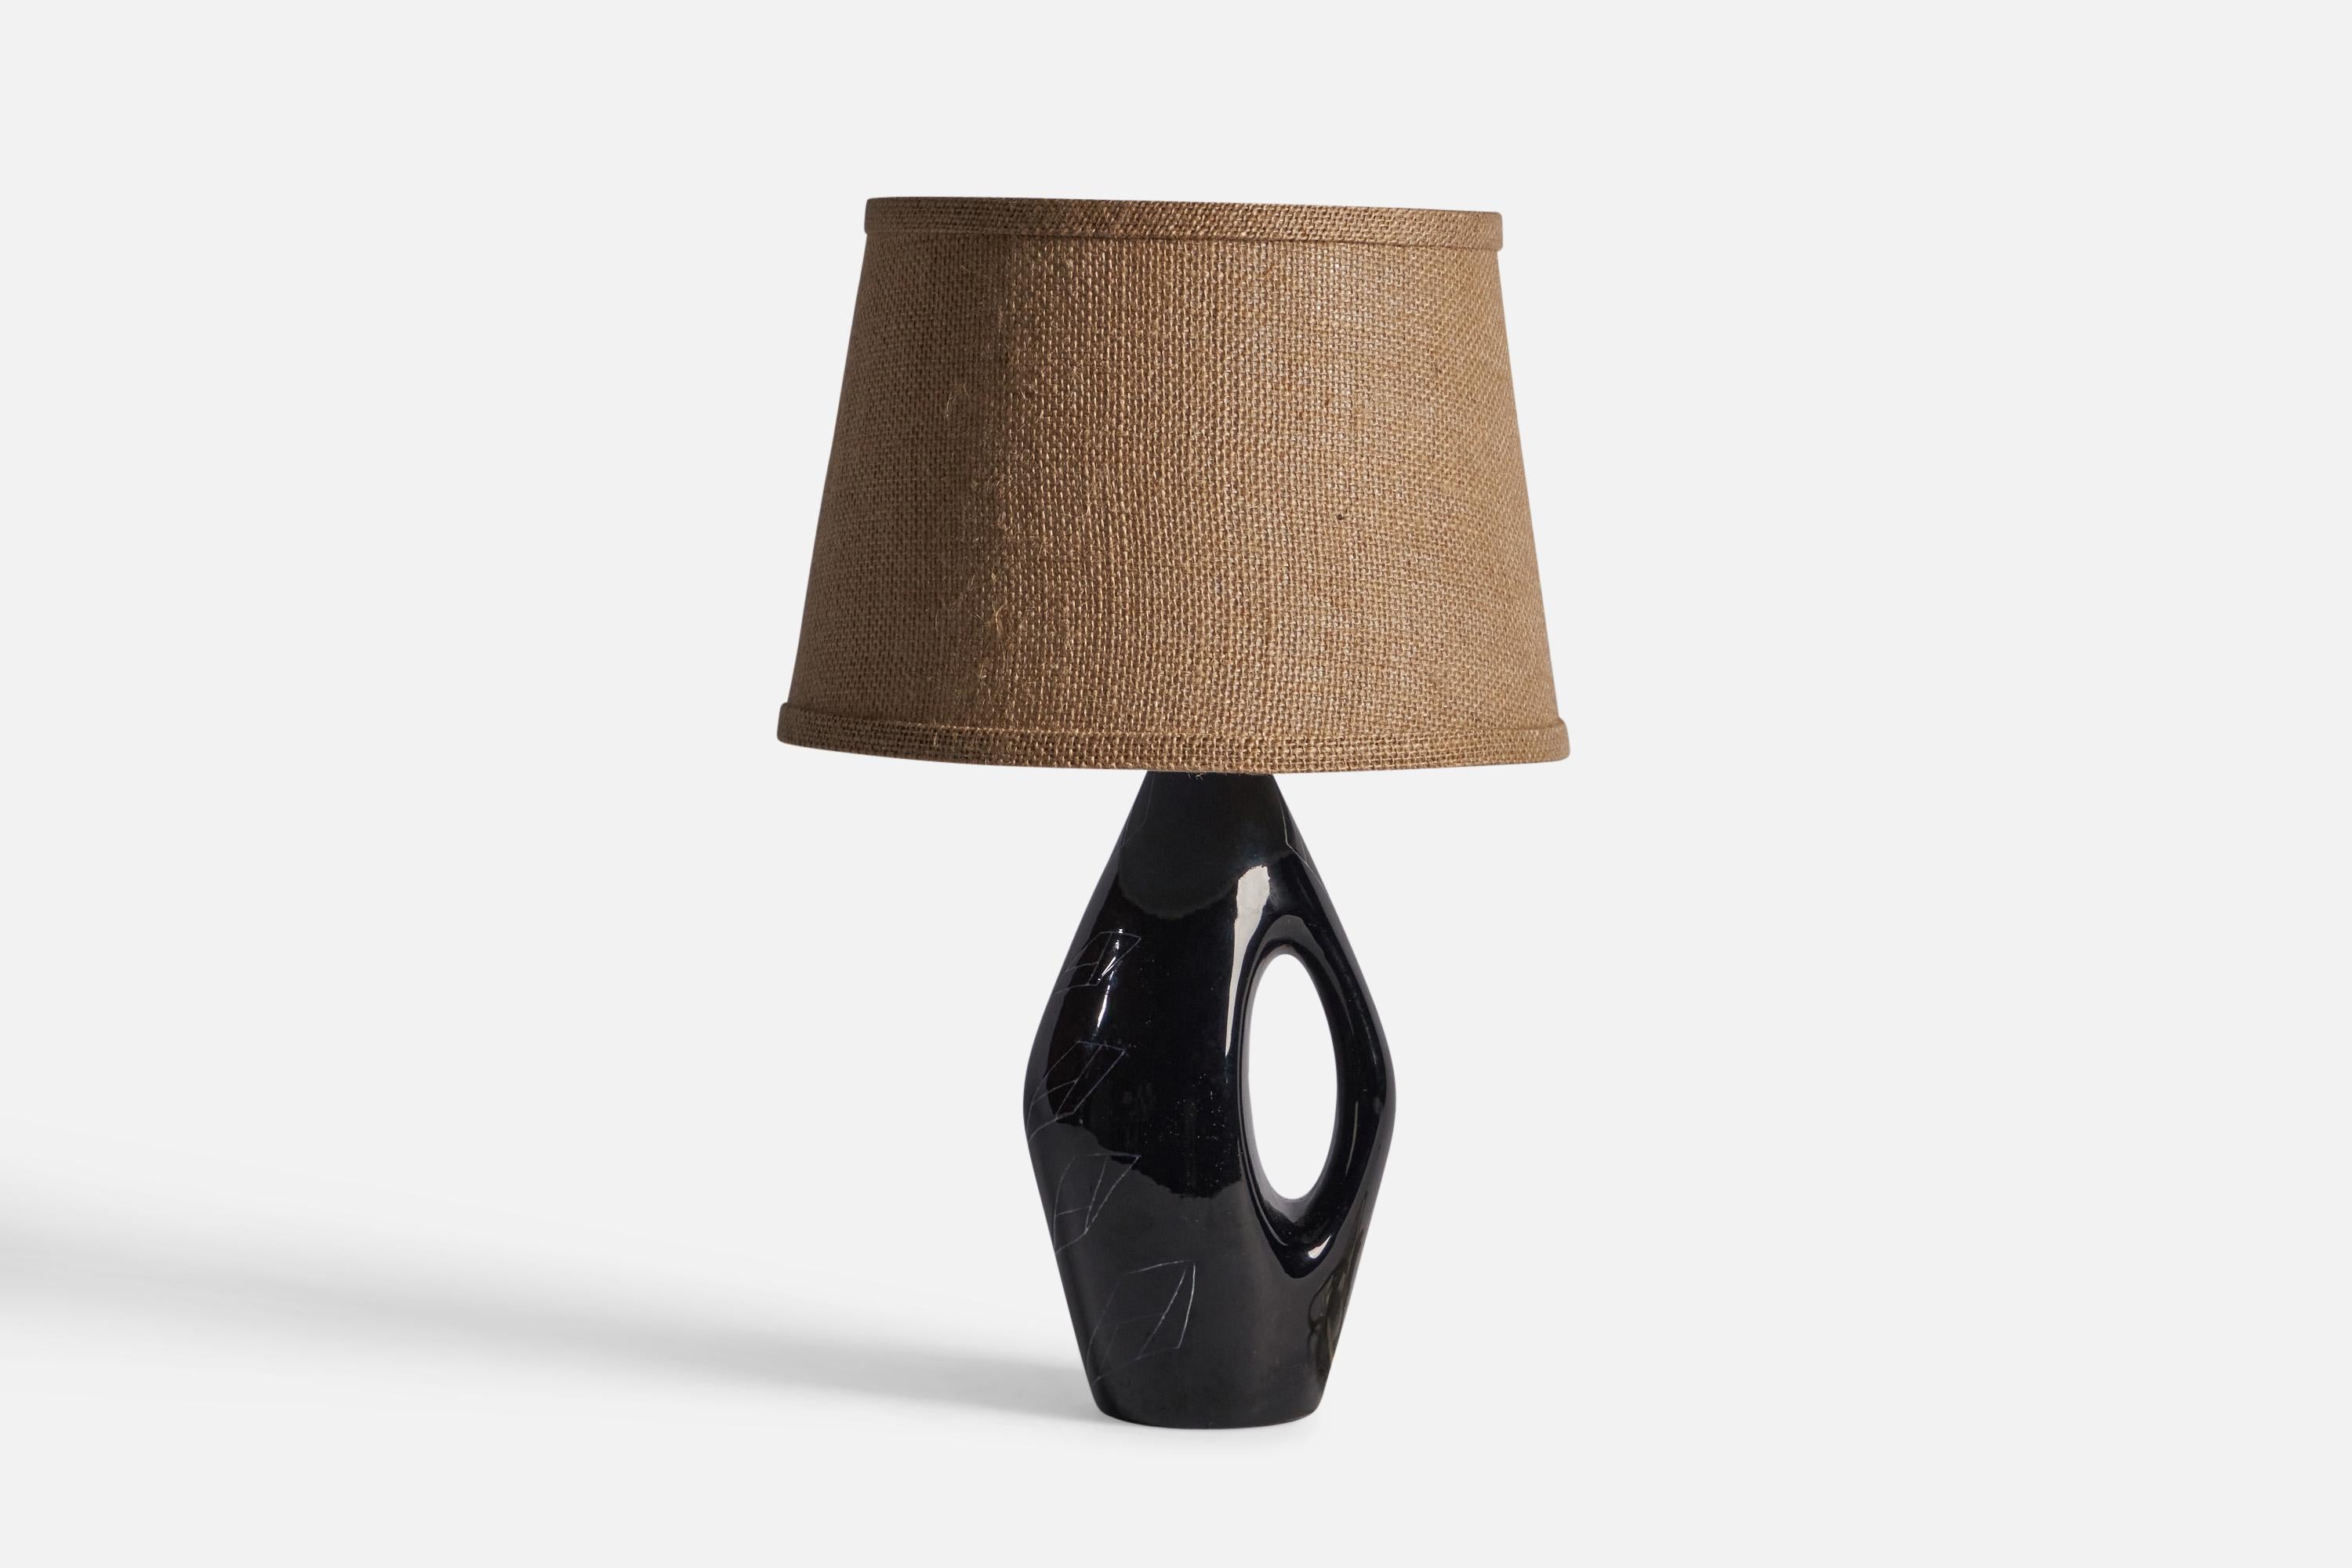 A black-glazed stoneware lamp with incised decor, designed and produced in Sweden, 1960s.

Dimensions of Lamp (inches): 11.75